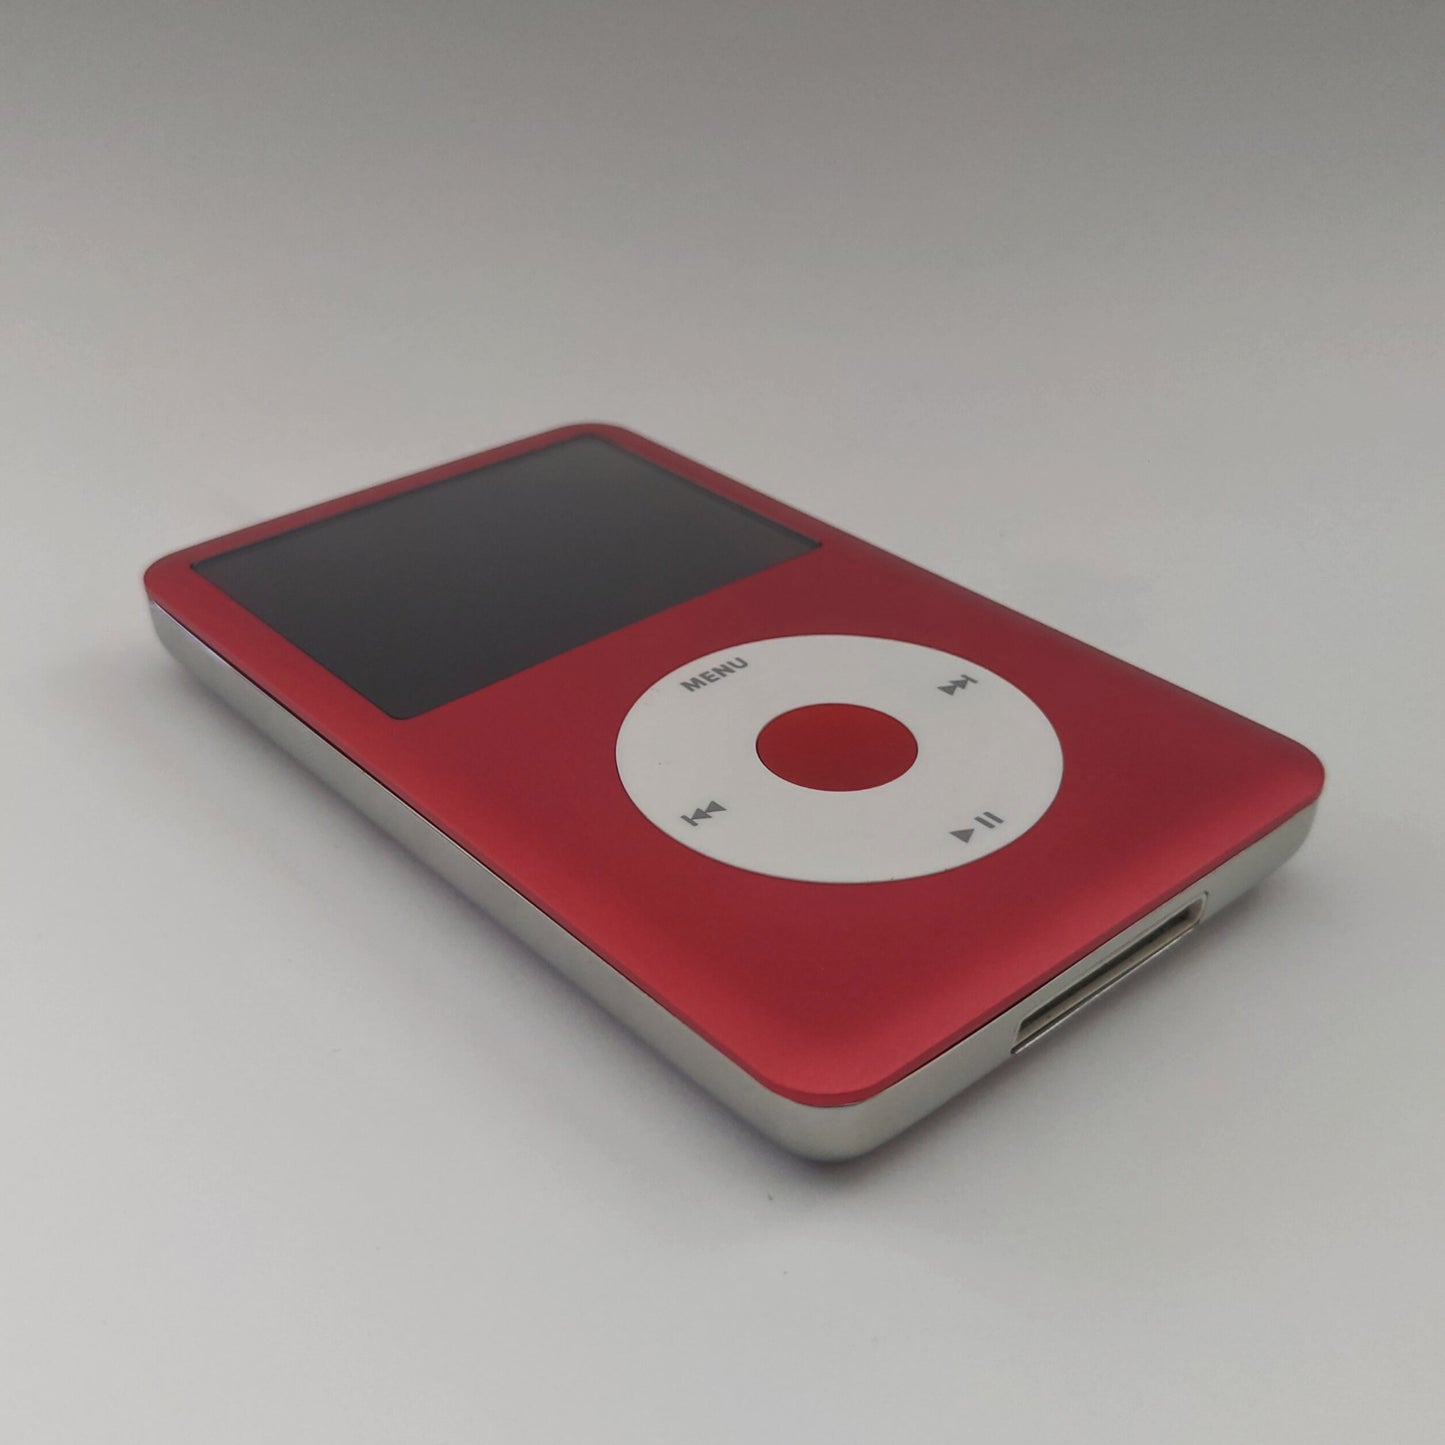 Red iPod classic front view